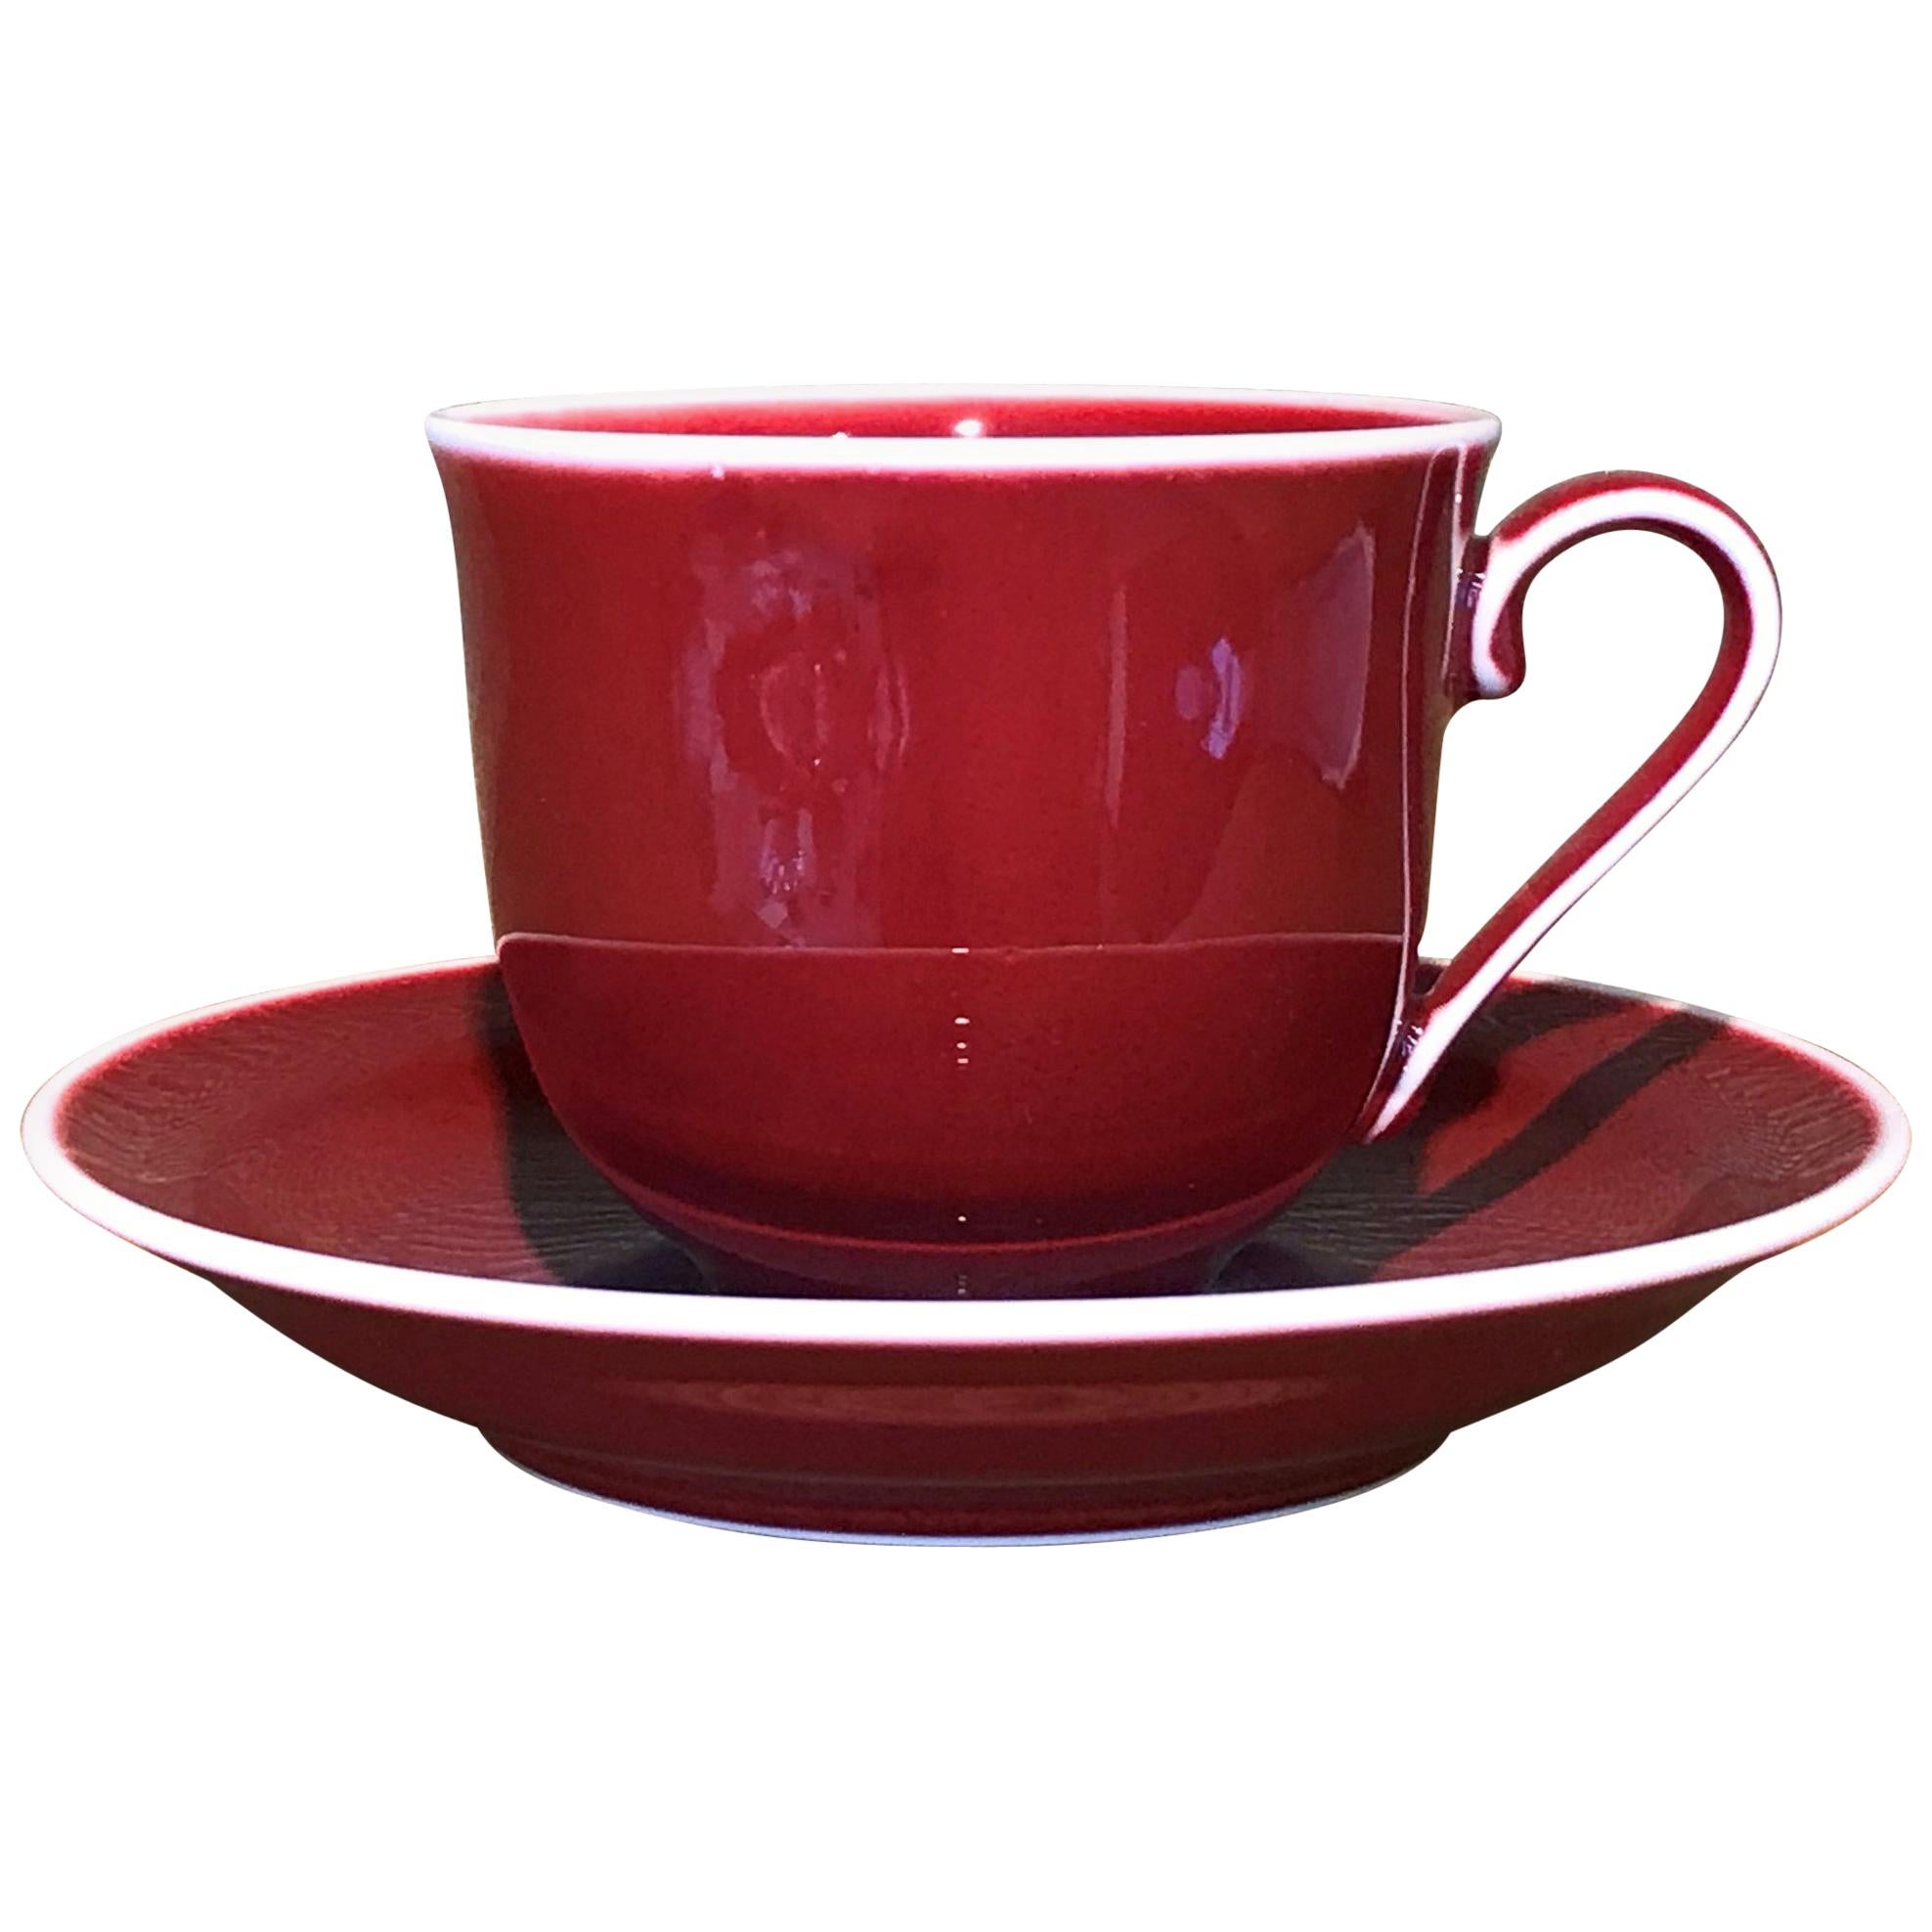 Japanese Contemporary Hand-Glazed Red Porcelain Cup and Saucer by Master Artist